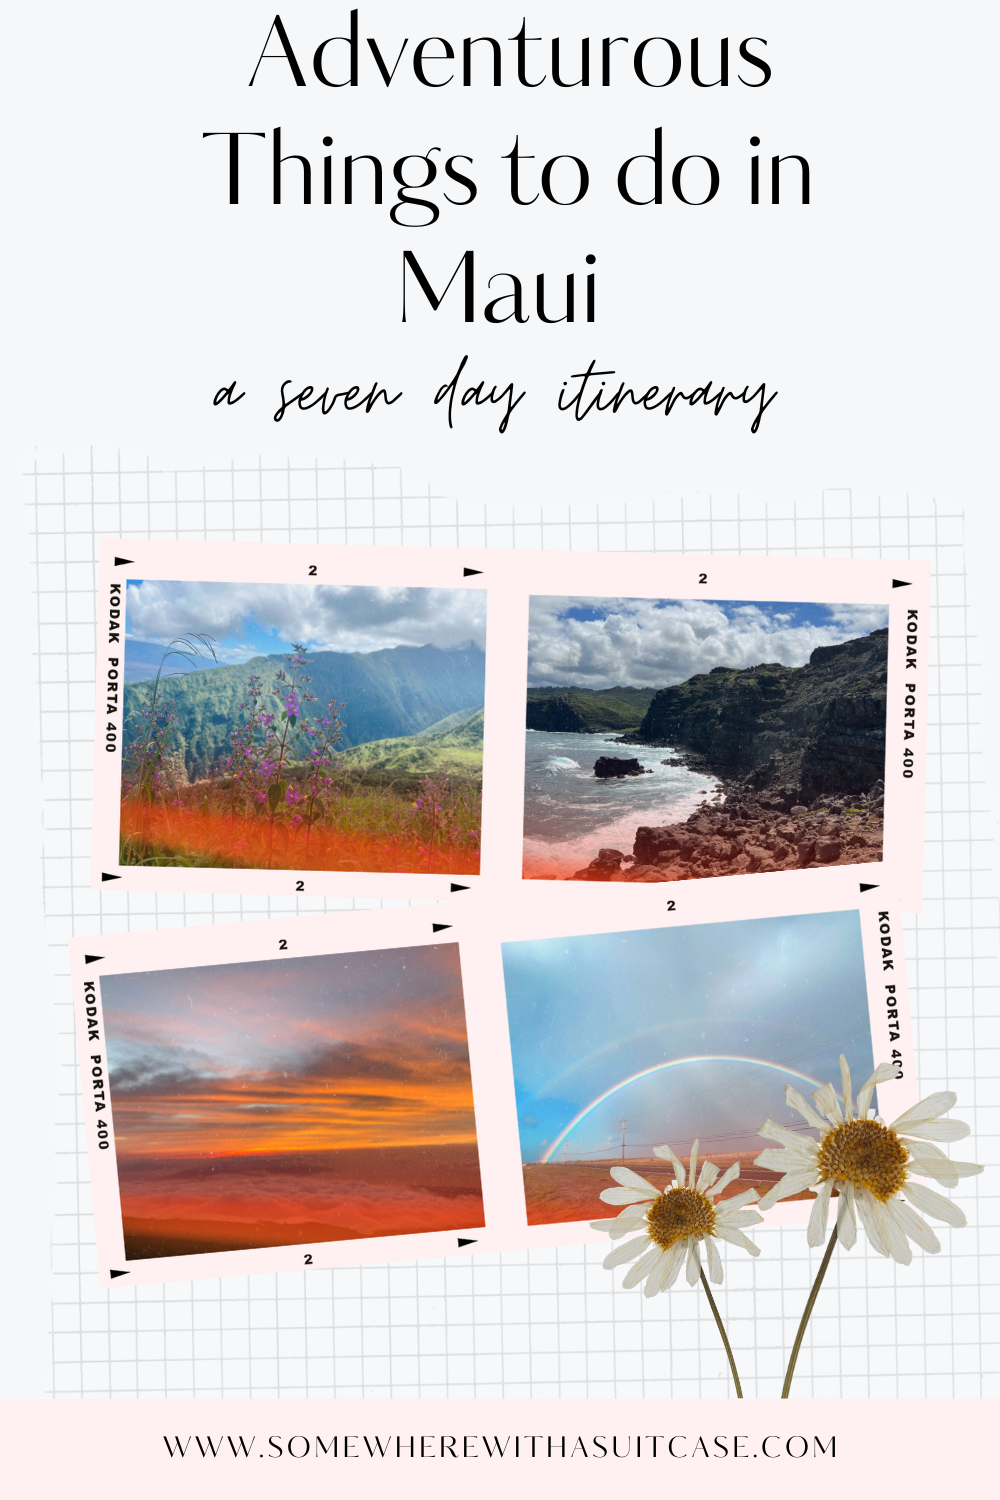 Adventurous Things to do in Maui